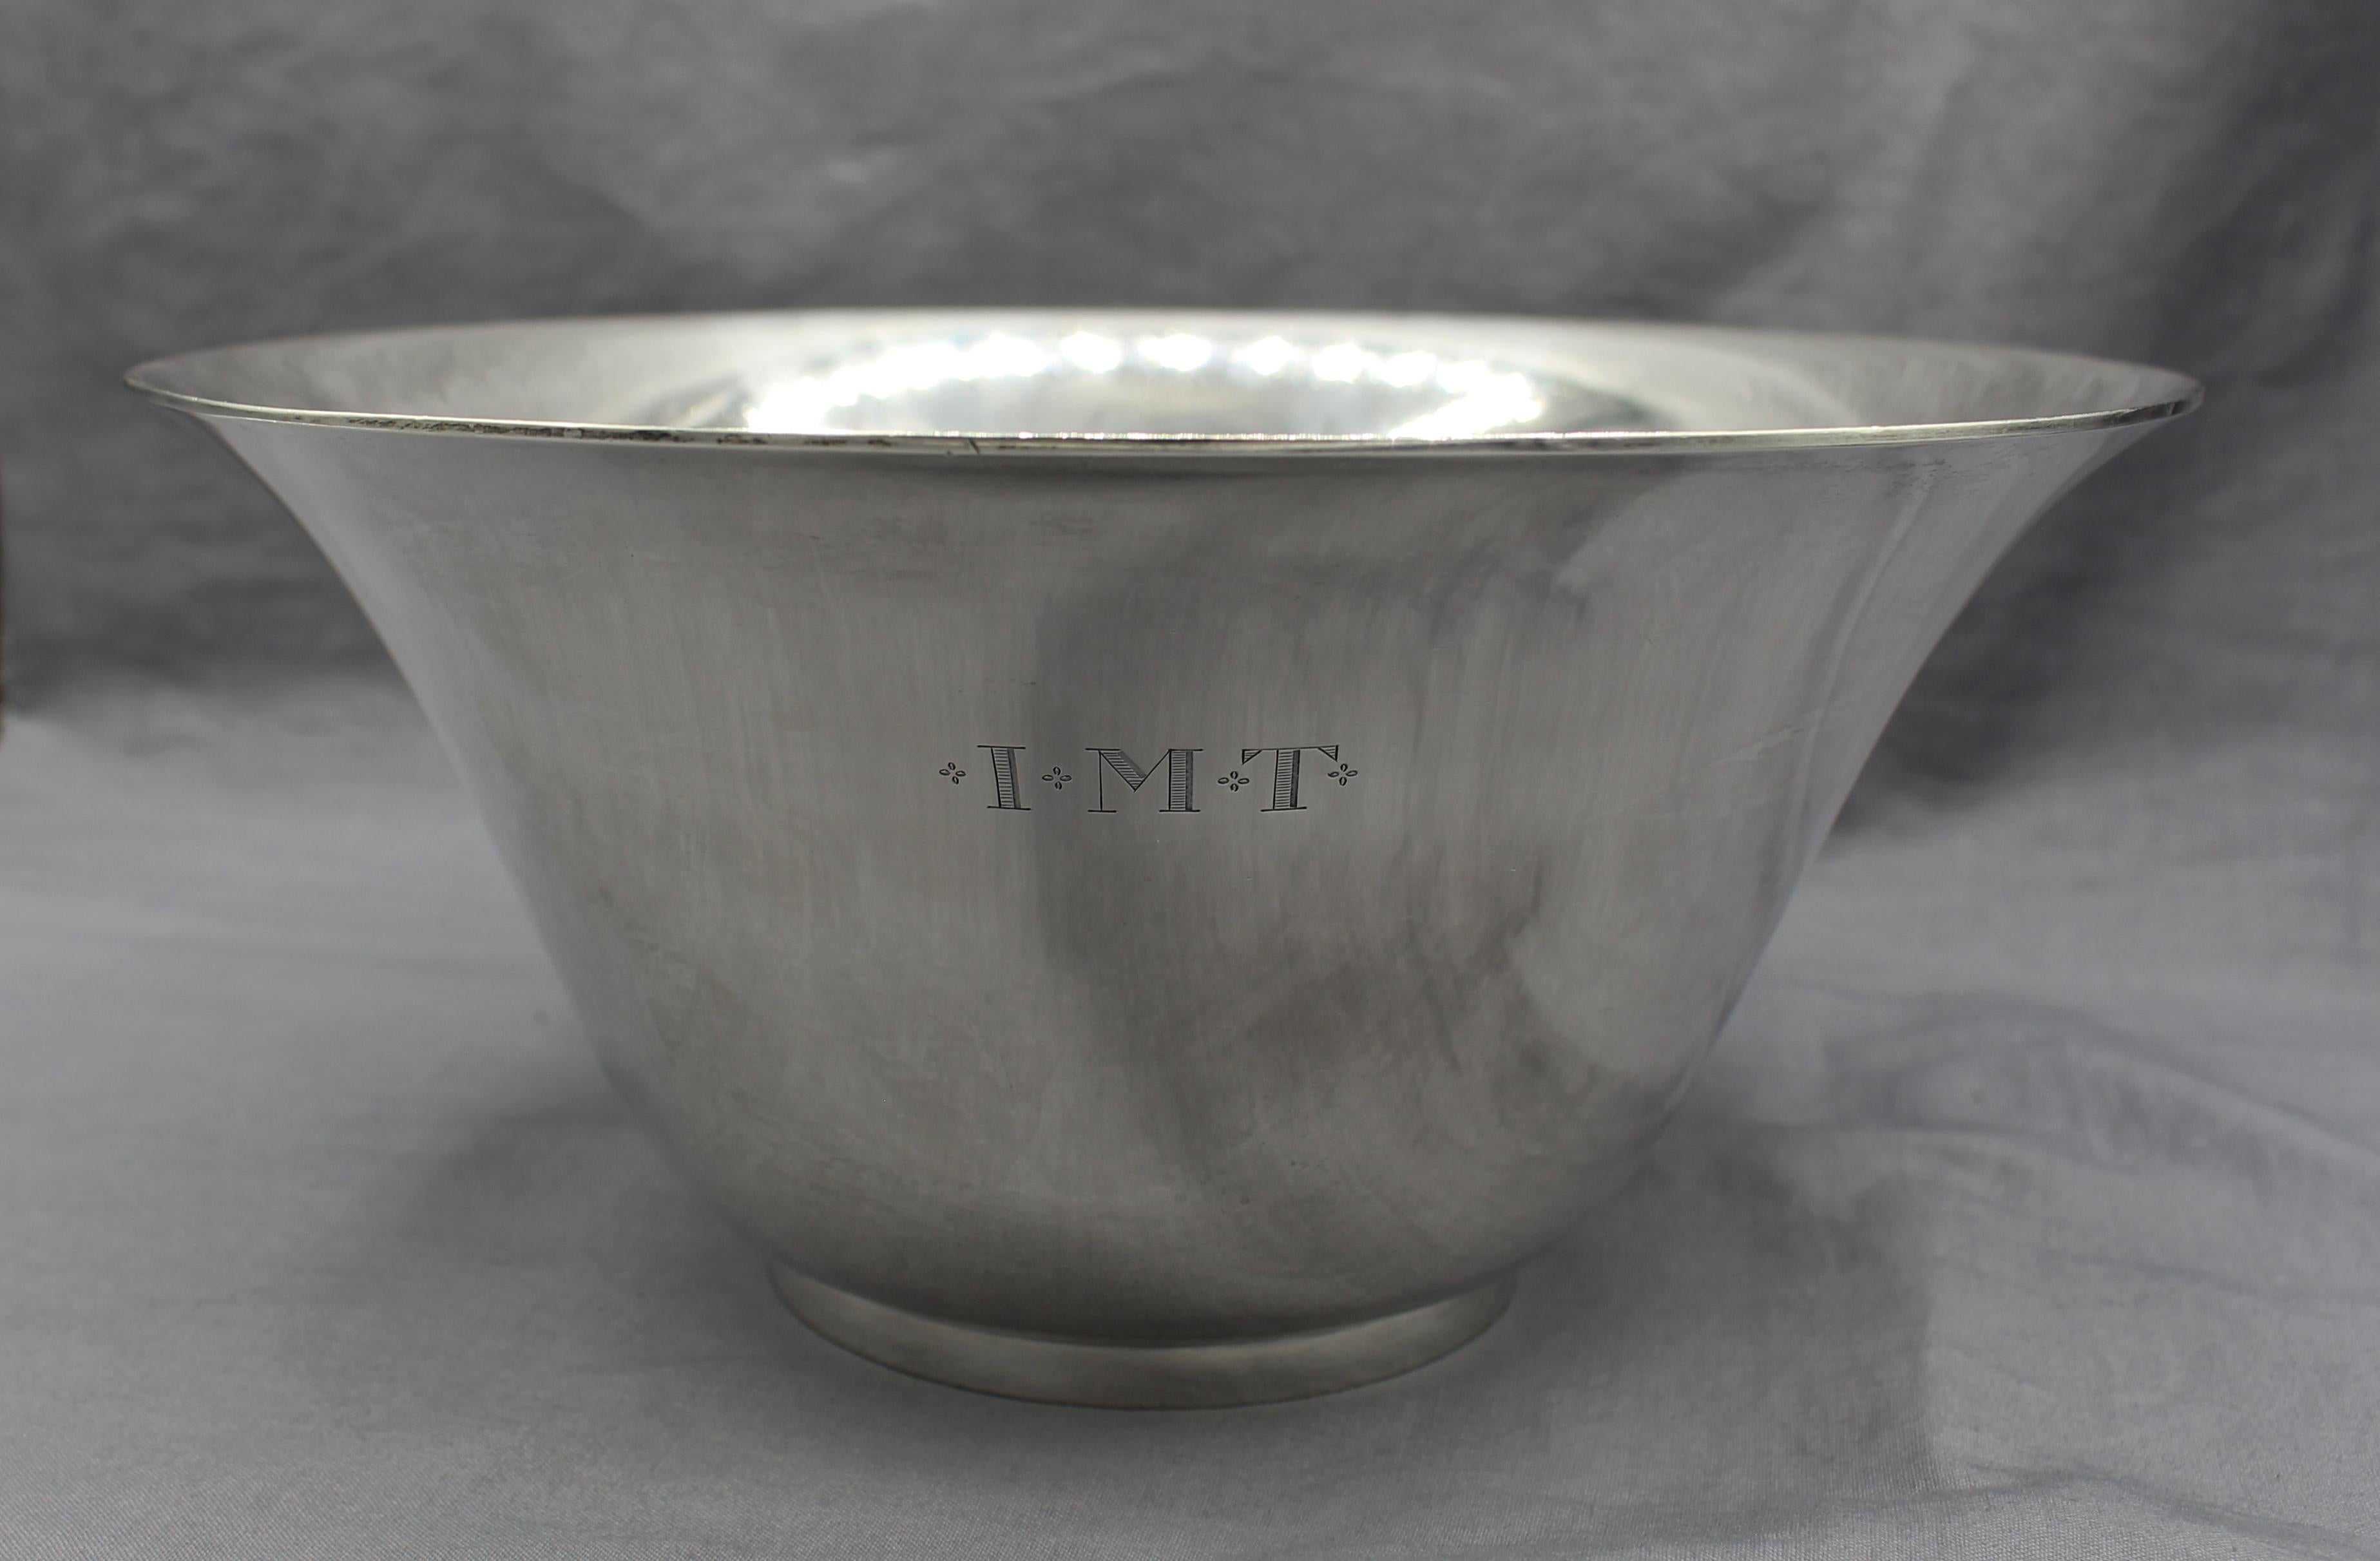 Sterling silver bowl by Tiffany, 1907-1947, American. A stunning & simple flared form. Monogramed 